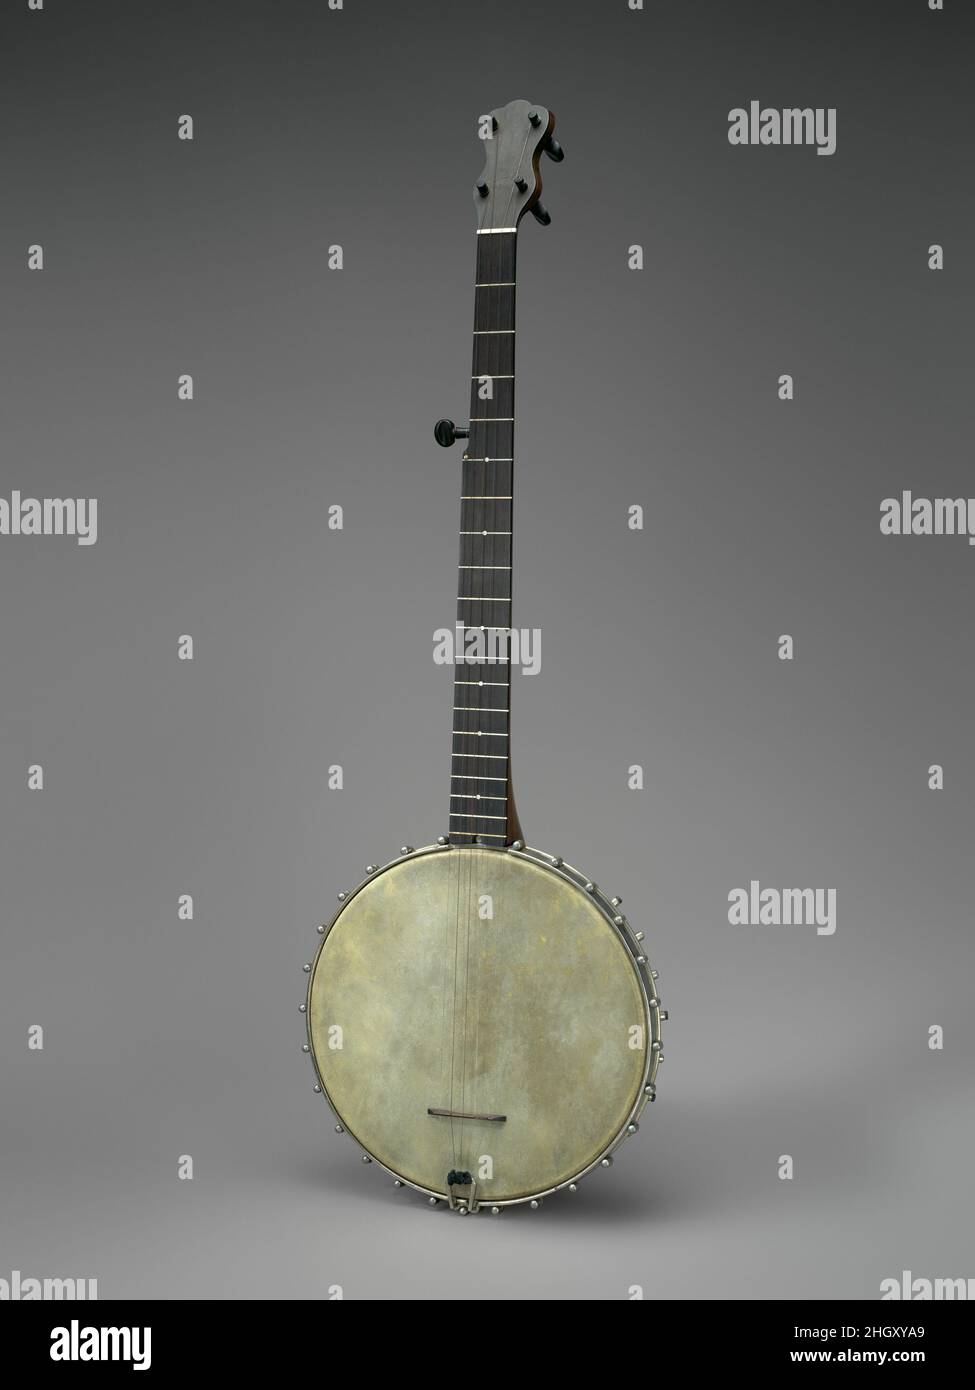 Banjo ca. 1884 Hercules McCord American Hercules McCord, a banjo maker from St. Louis, MO, produced this banjo in 1884. The neck design is conventional. However, the rim assembly, which incorporates three of McCord’s four patent innovations, ingeniously addresses several technical challenges related to rim design and head tightening assemblies. The 1880s saw major innovations in banjo design and technology. 75 patents related to banjos were registered with the U. S. Patent Office during that decade. Many of these patents focused on either the mechanisms used to tighten the skin head or the des Stock Photo